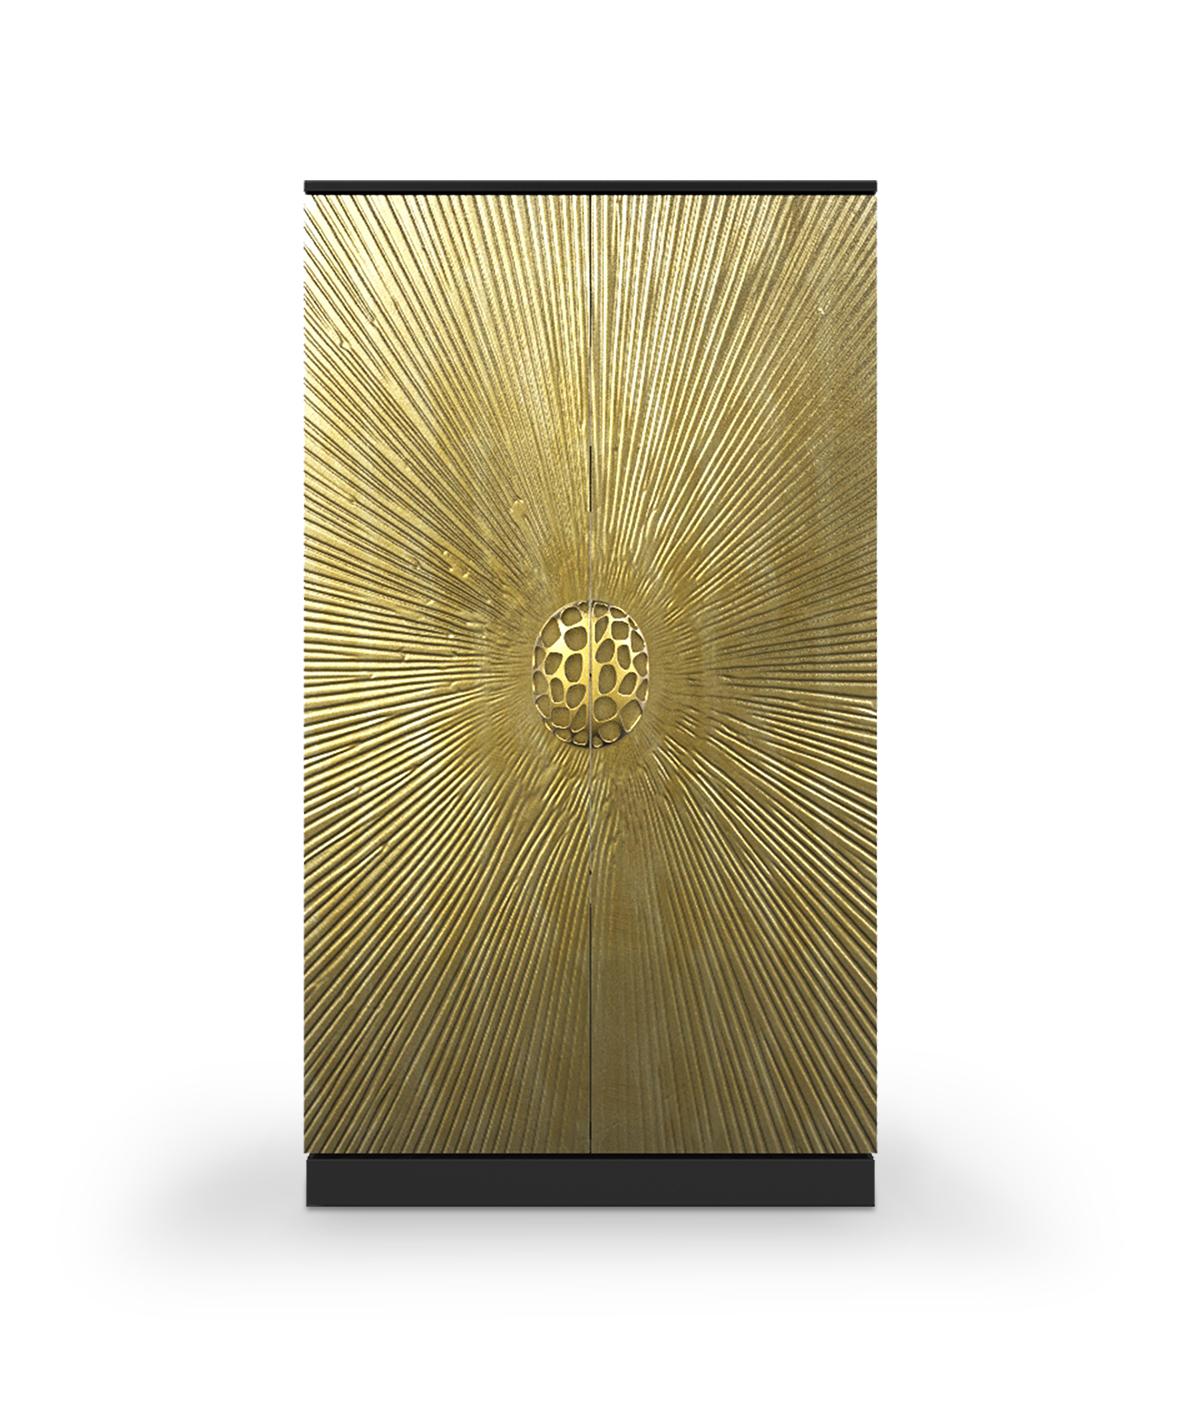 Dripping like honey with Koket glamor, Heive is the Queen Bee of timeless black and gold cabinets. The alluring golden doors feature an exploding sunburst design enchanting you at first glance. For her majesty’s crowning touch, an enticing honeycomb